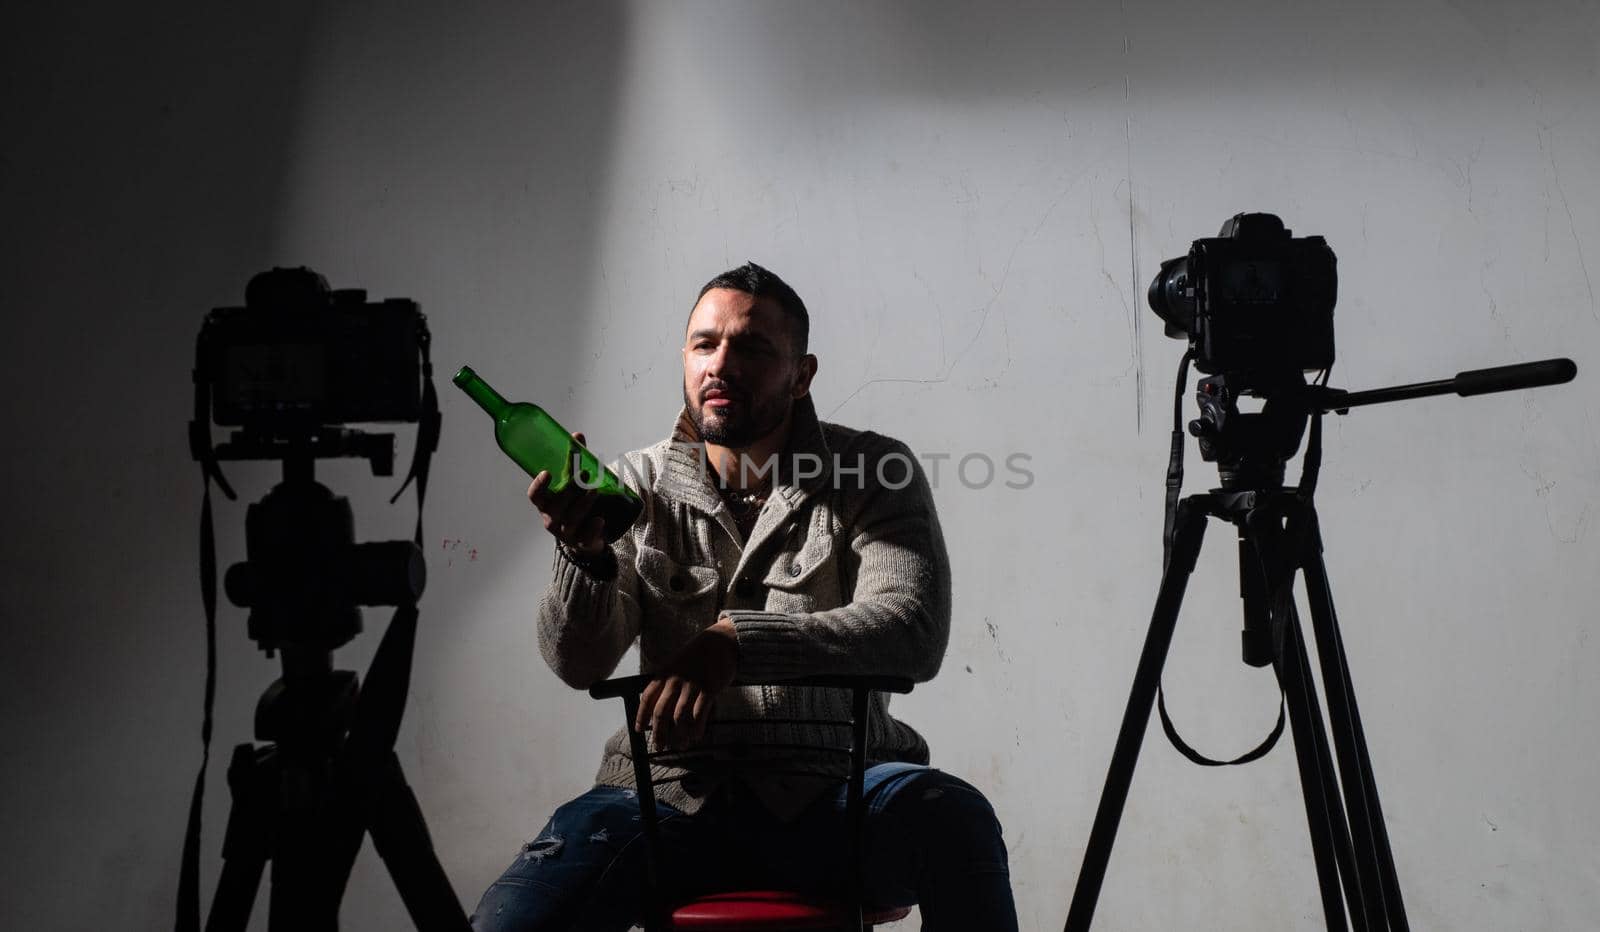 Man with bottle sitting. After a photo shoot with a bottle of alcohol. Professional camera. Handsome bearded man. Portrait of thinking stylish young man looking away